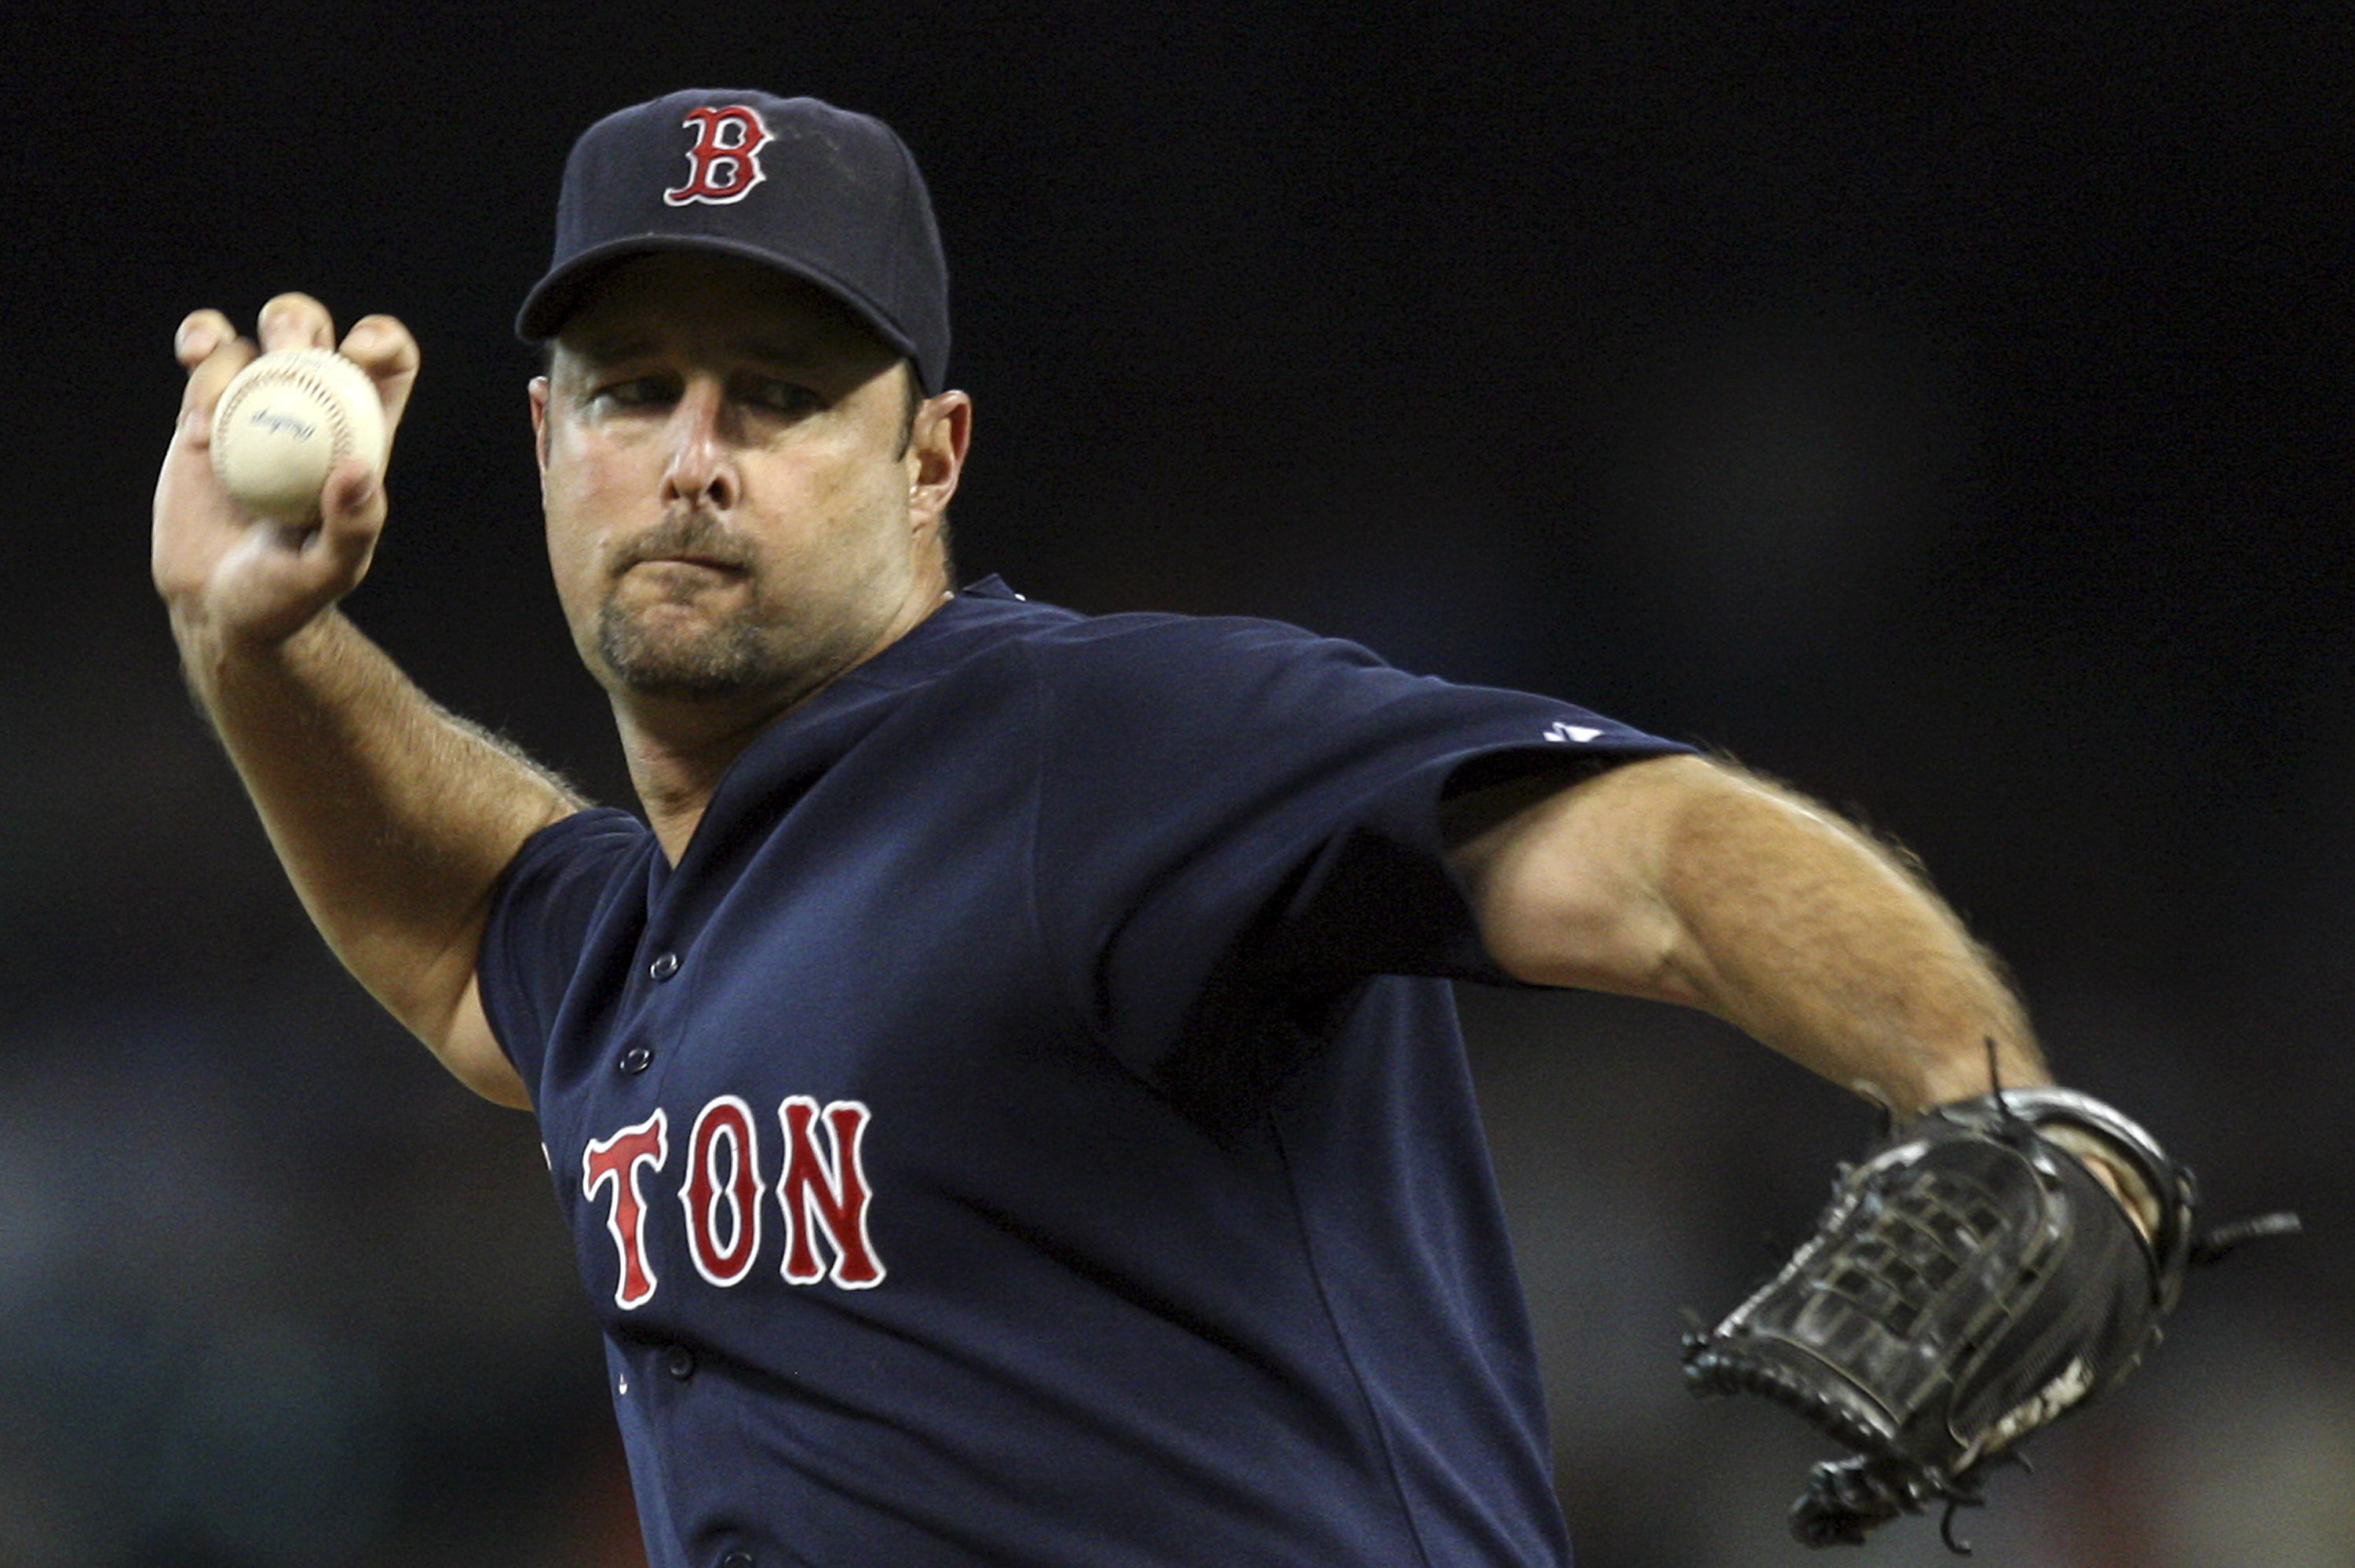 Boston Red Sox: Tim Wakefield's Retirement; Is He a Once-in-a